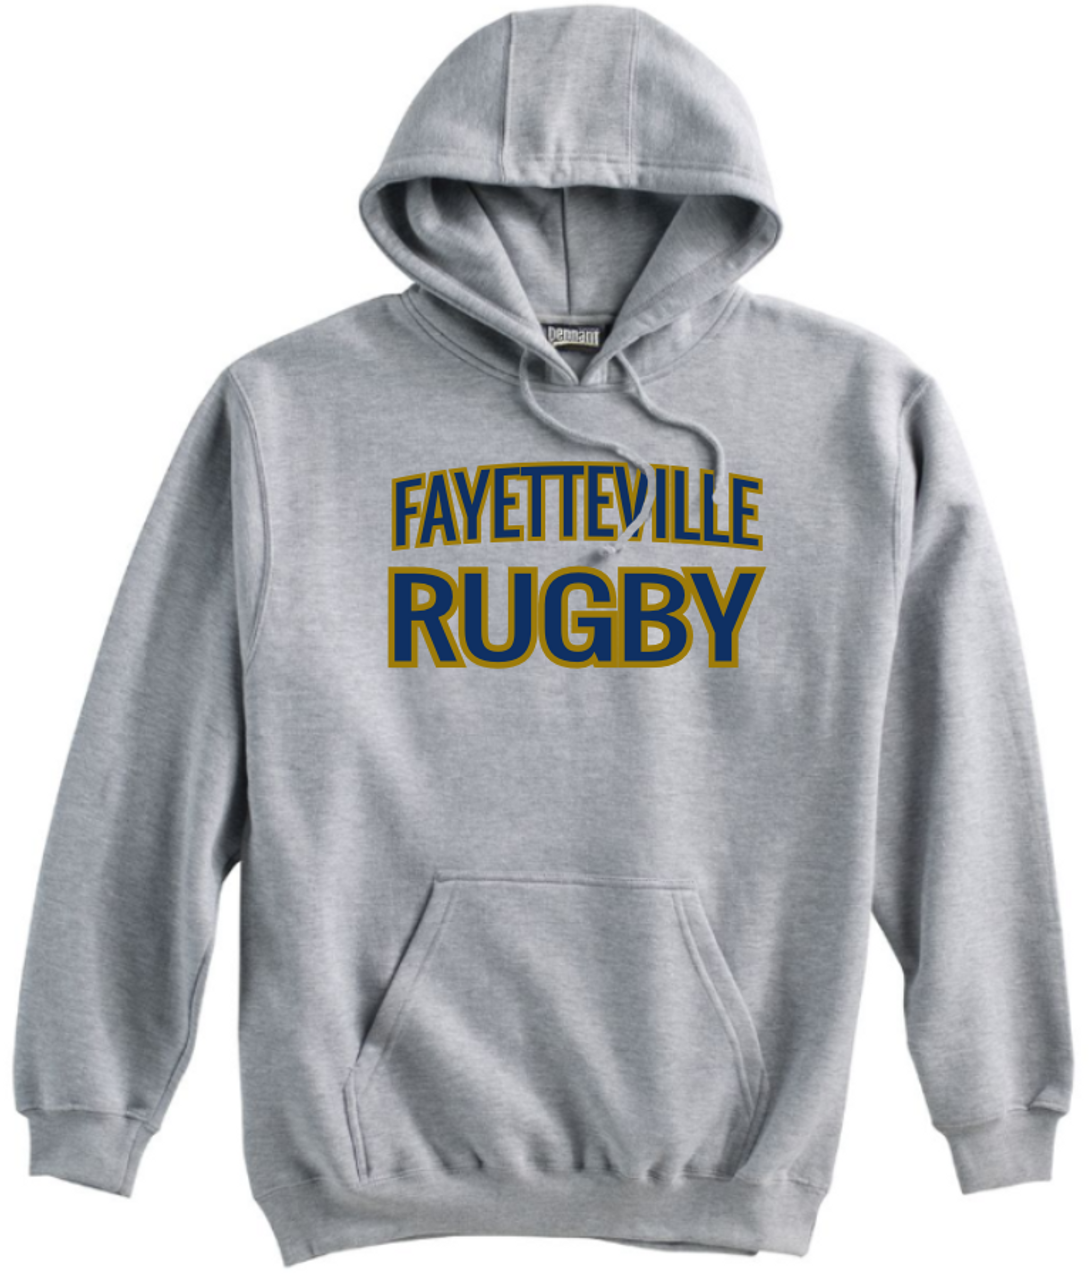 Fayetteville Area Rugby Hoodie, Gray